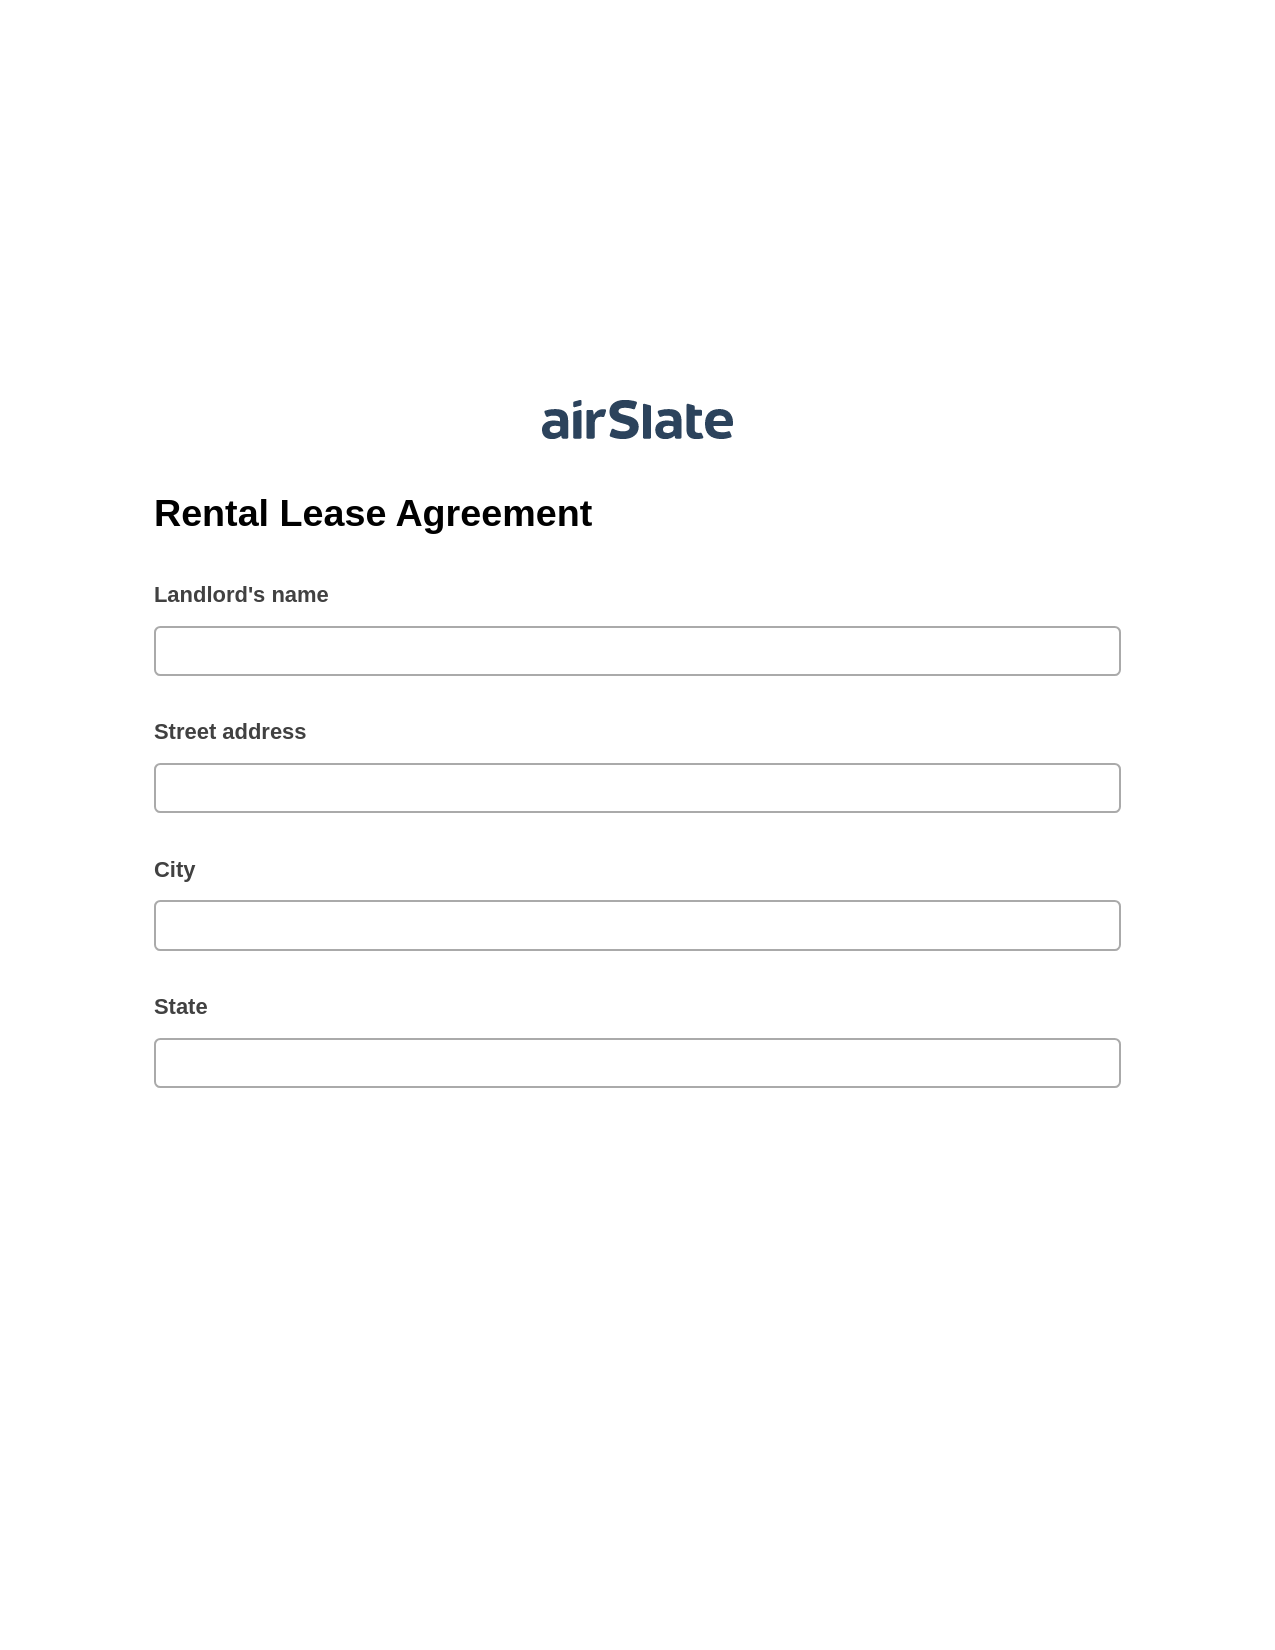 Multirole Rental Lease Agreement Pre-fill from MySQL Bot, Open as Role Bot, Export to Excel 365 Bot